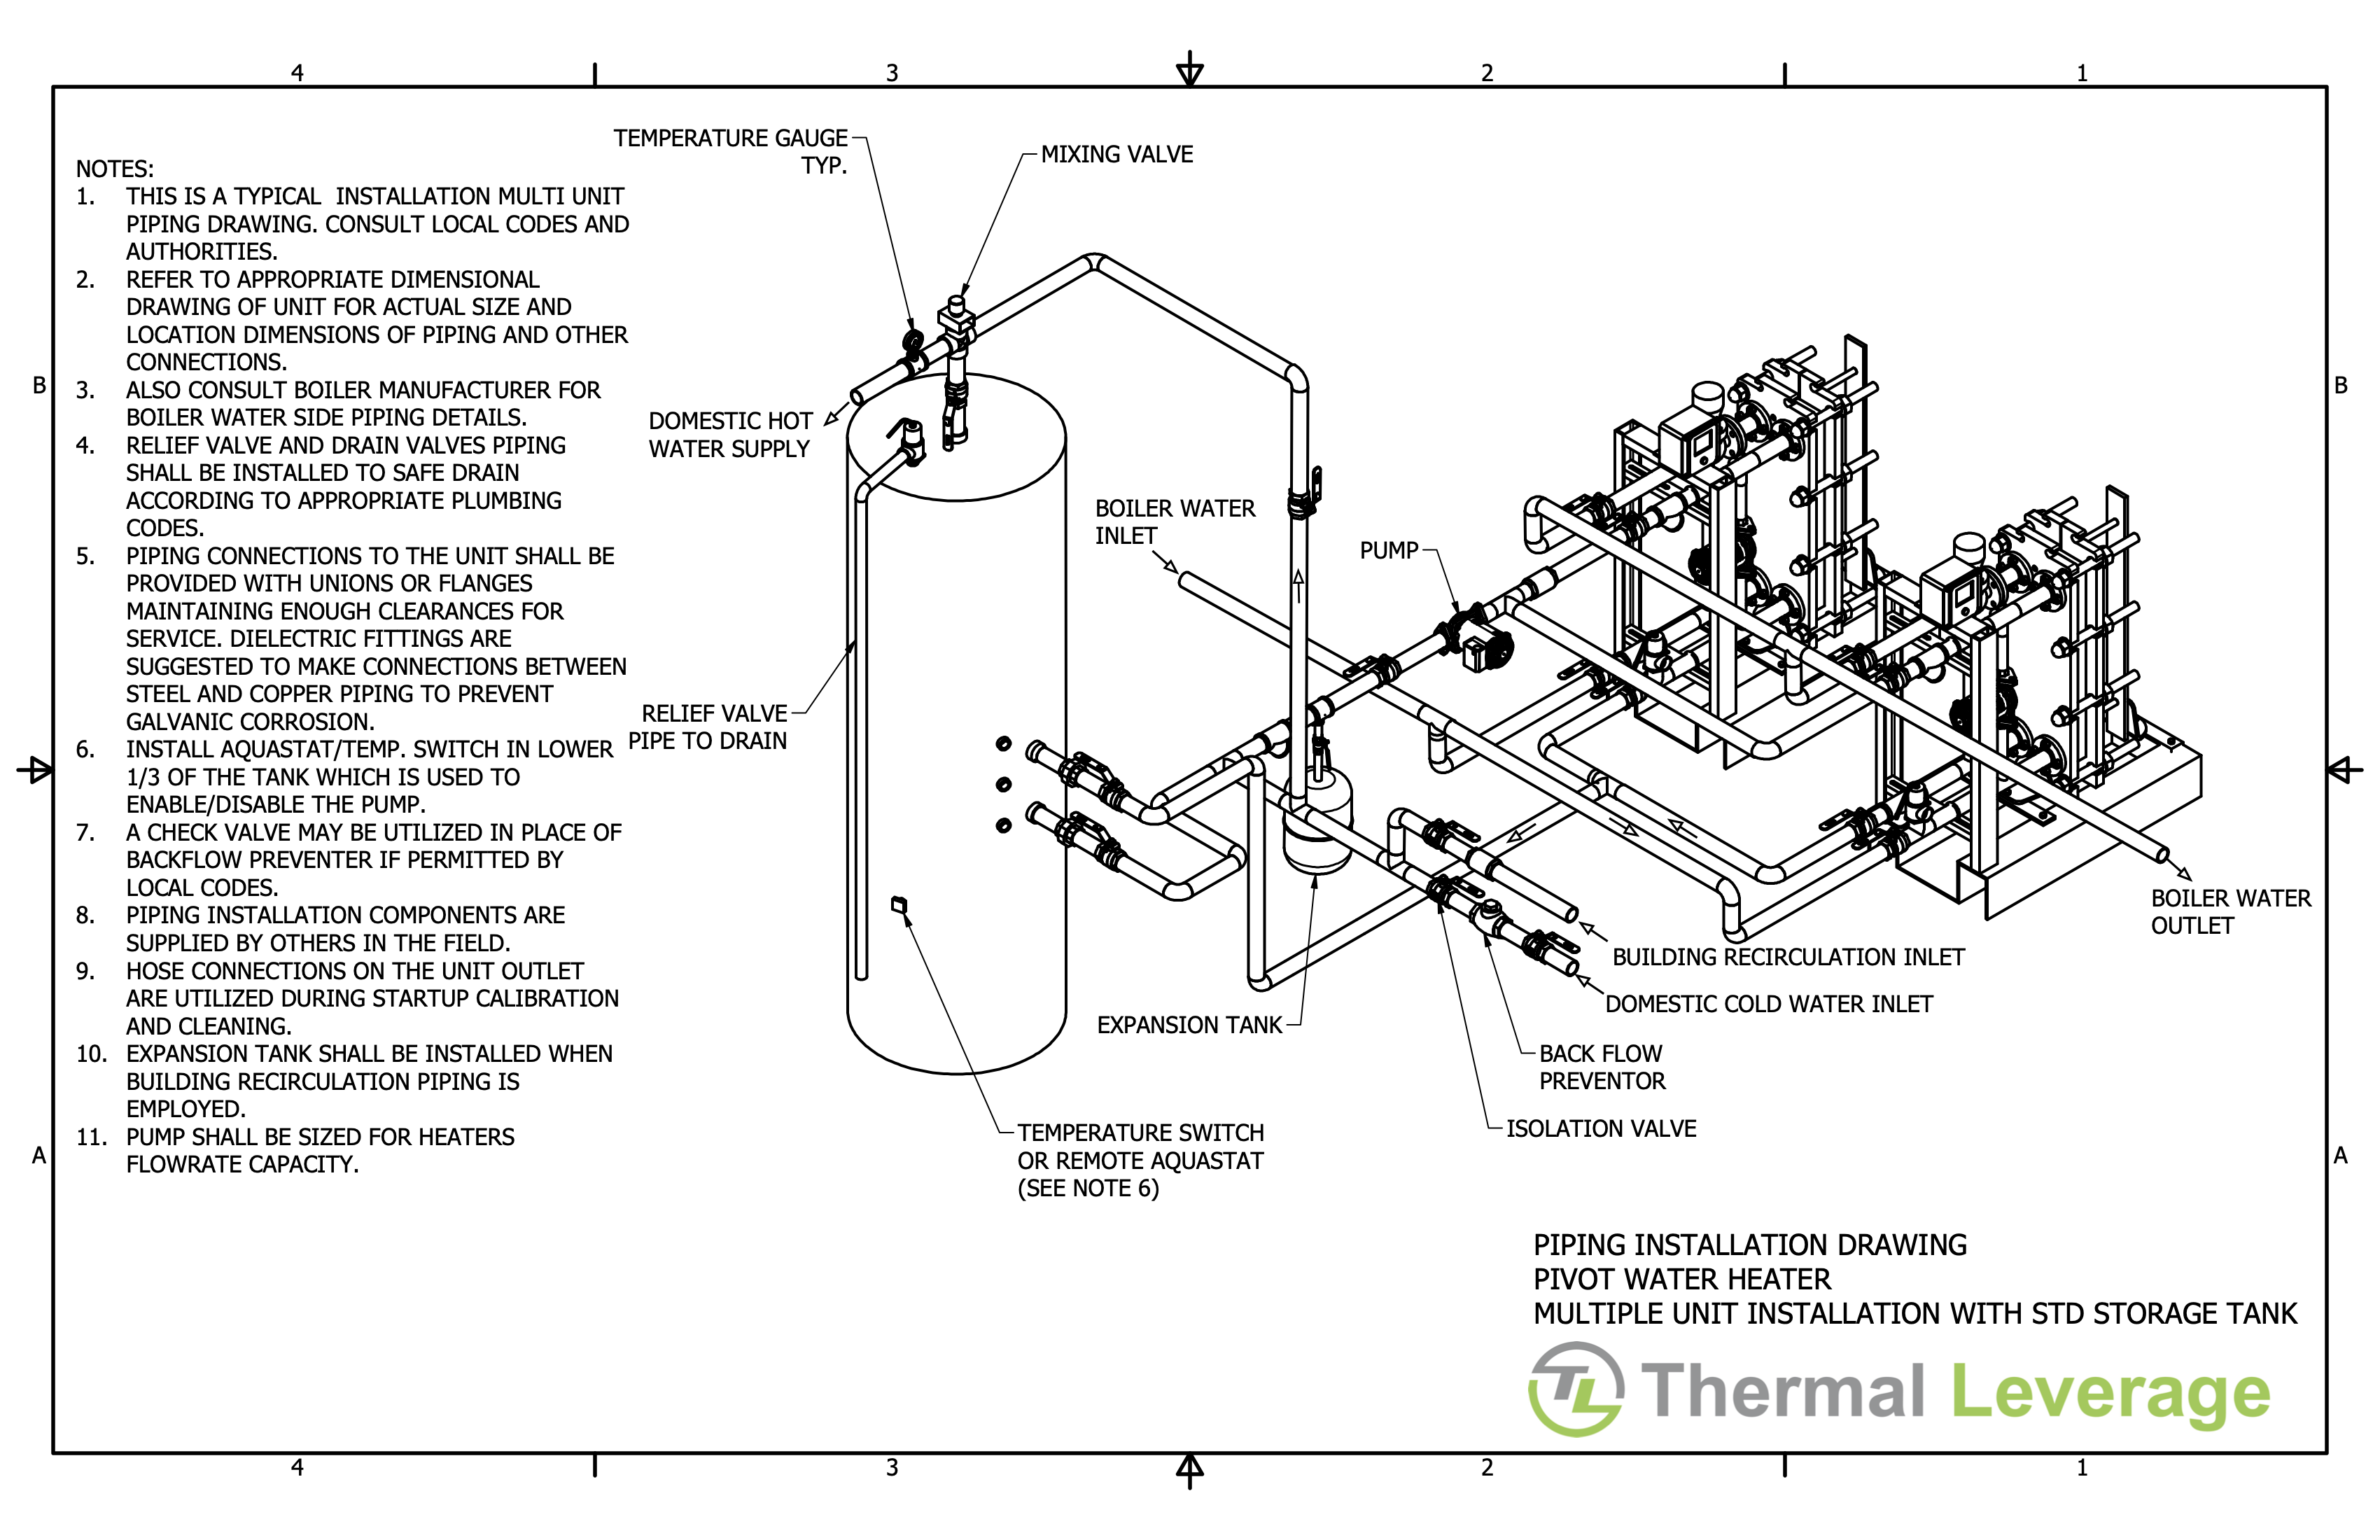 PIPING-INSTALL-DRAWING-PIVOT-WATER-HEATER-MULTIPLE-UNIT-INSTALL-WITH-STD-STORAGE-TANK.png